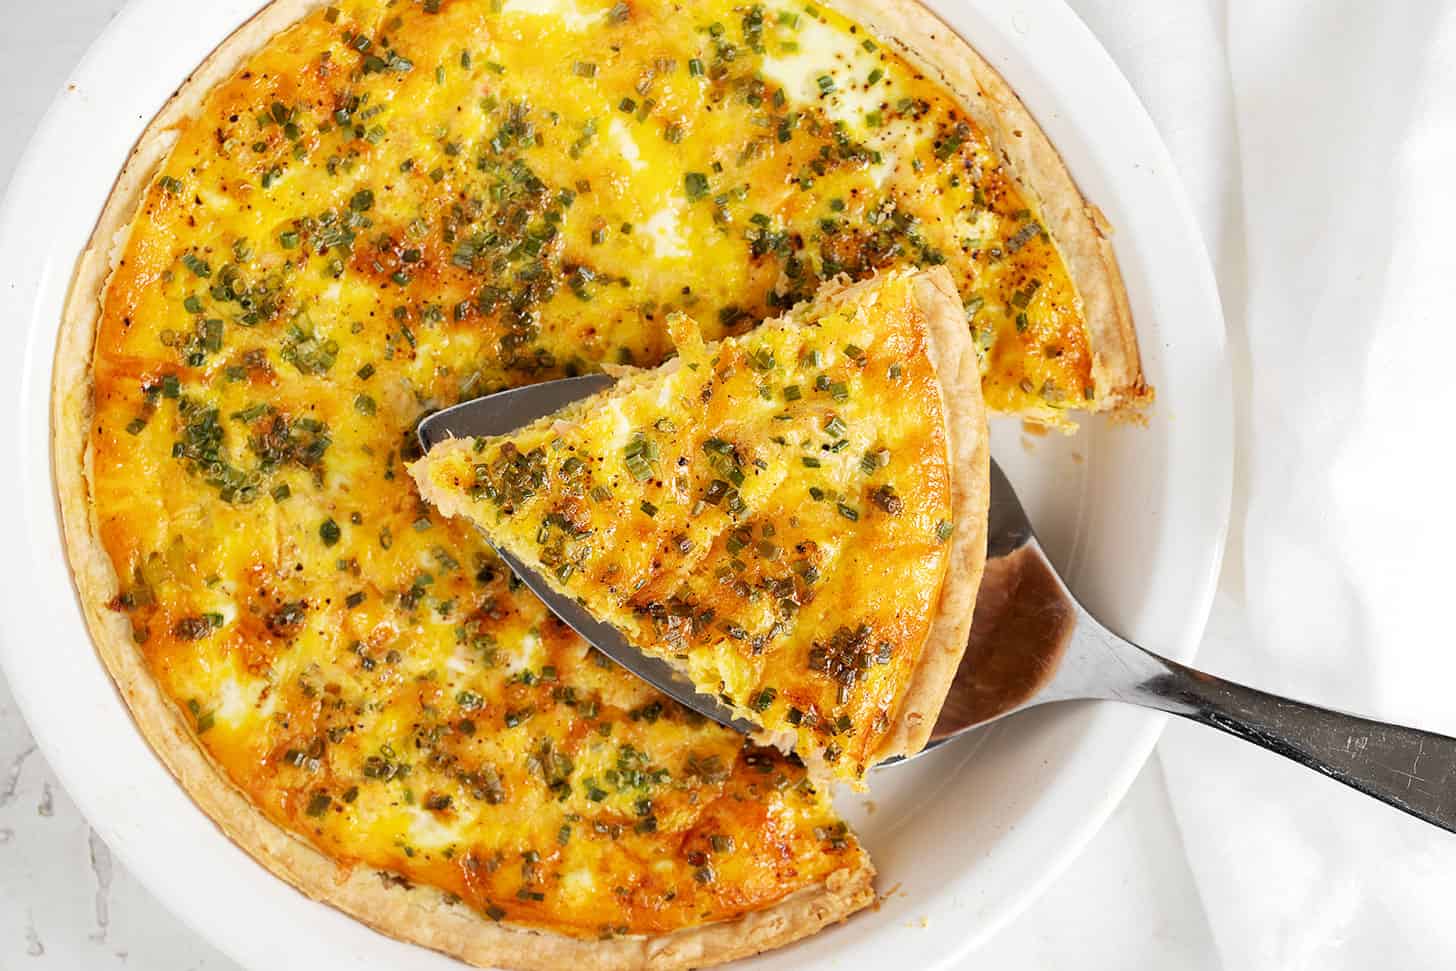 Salmon quiche in pie dish with a sliced on server.